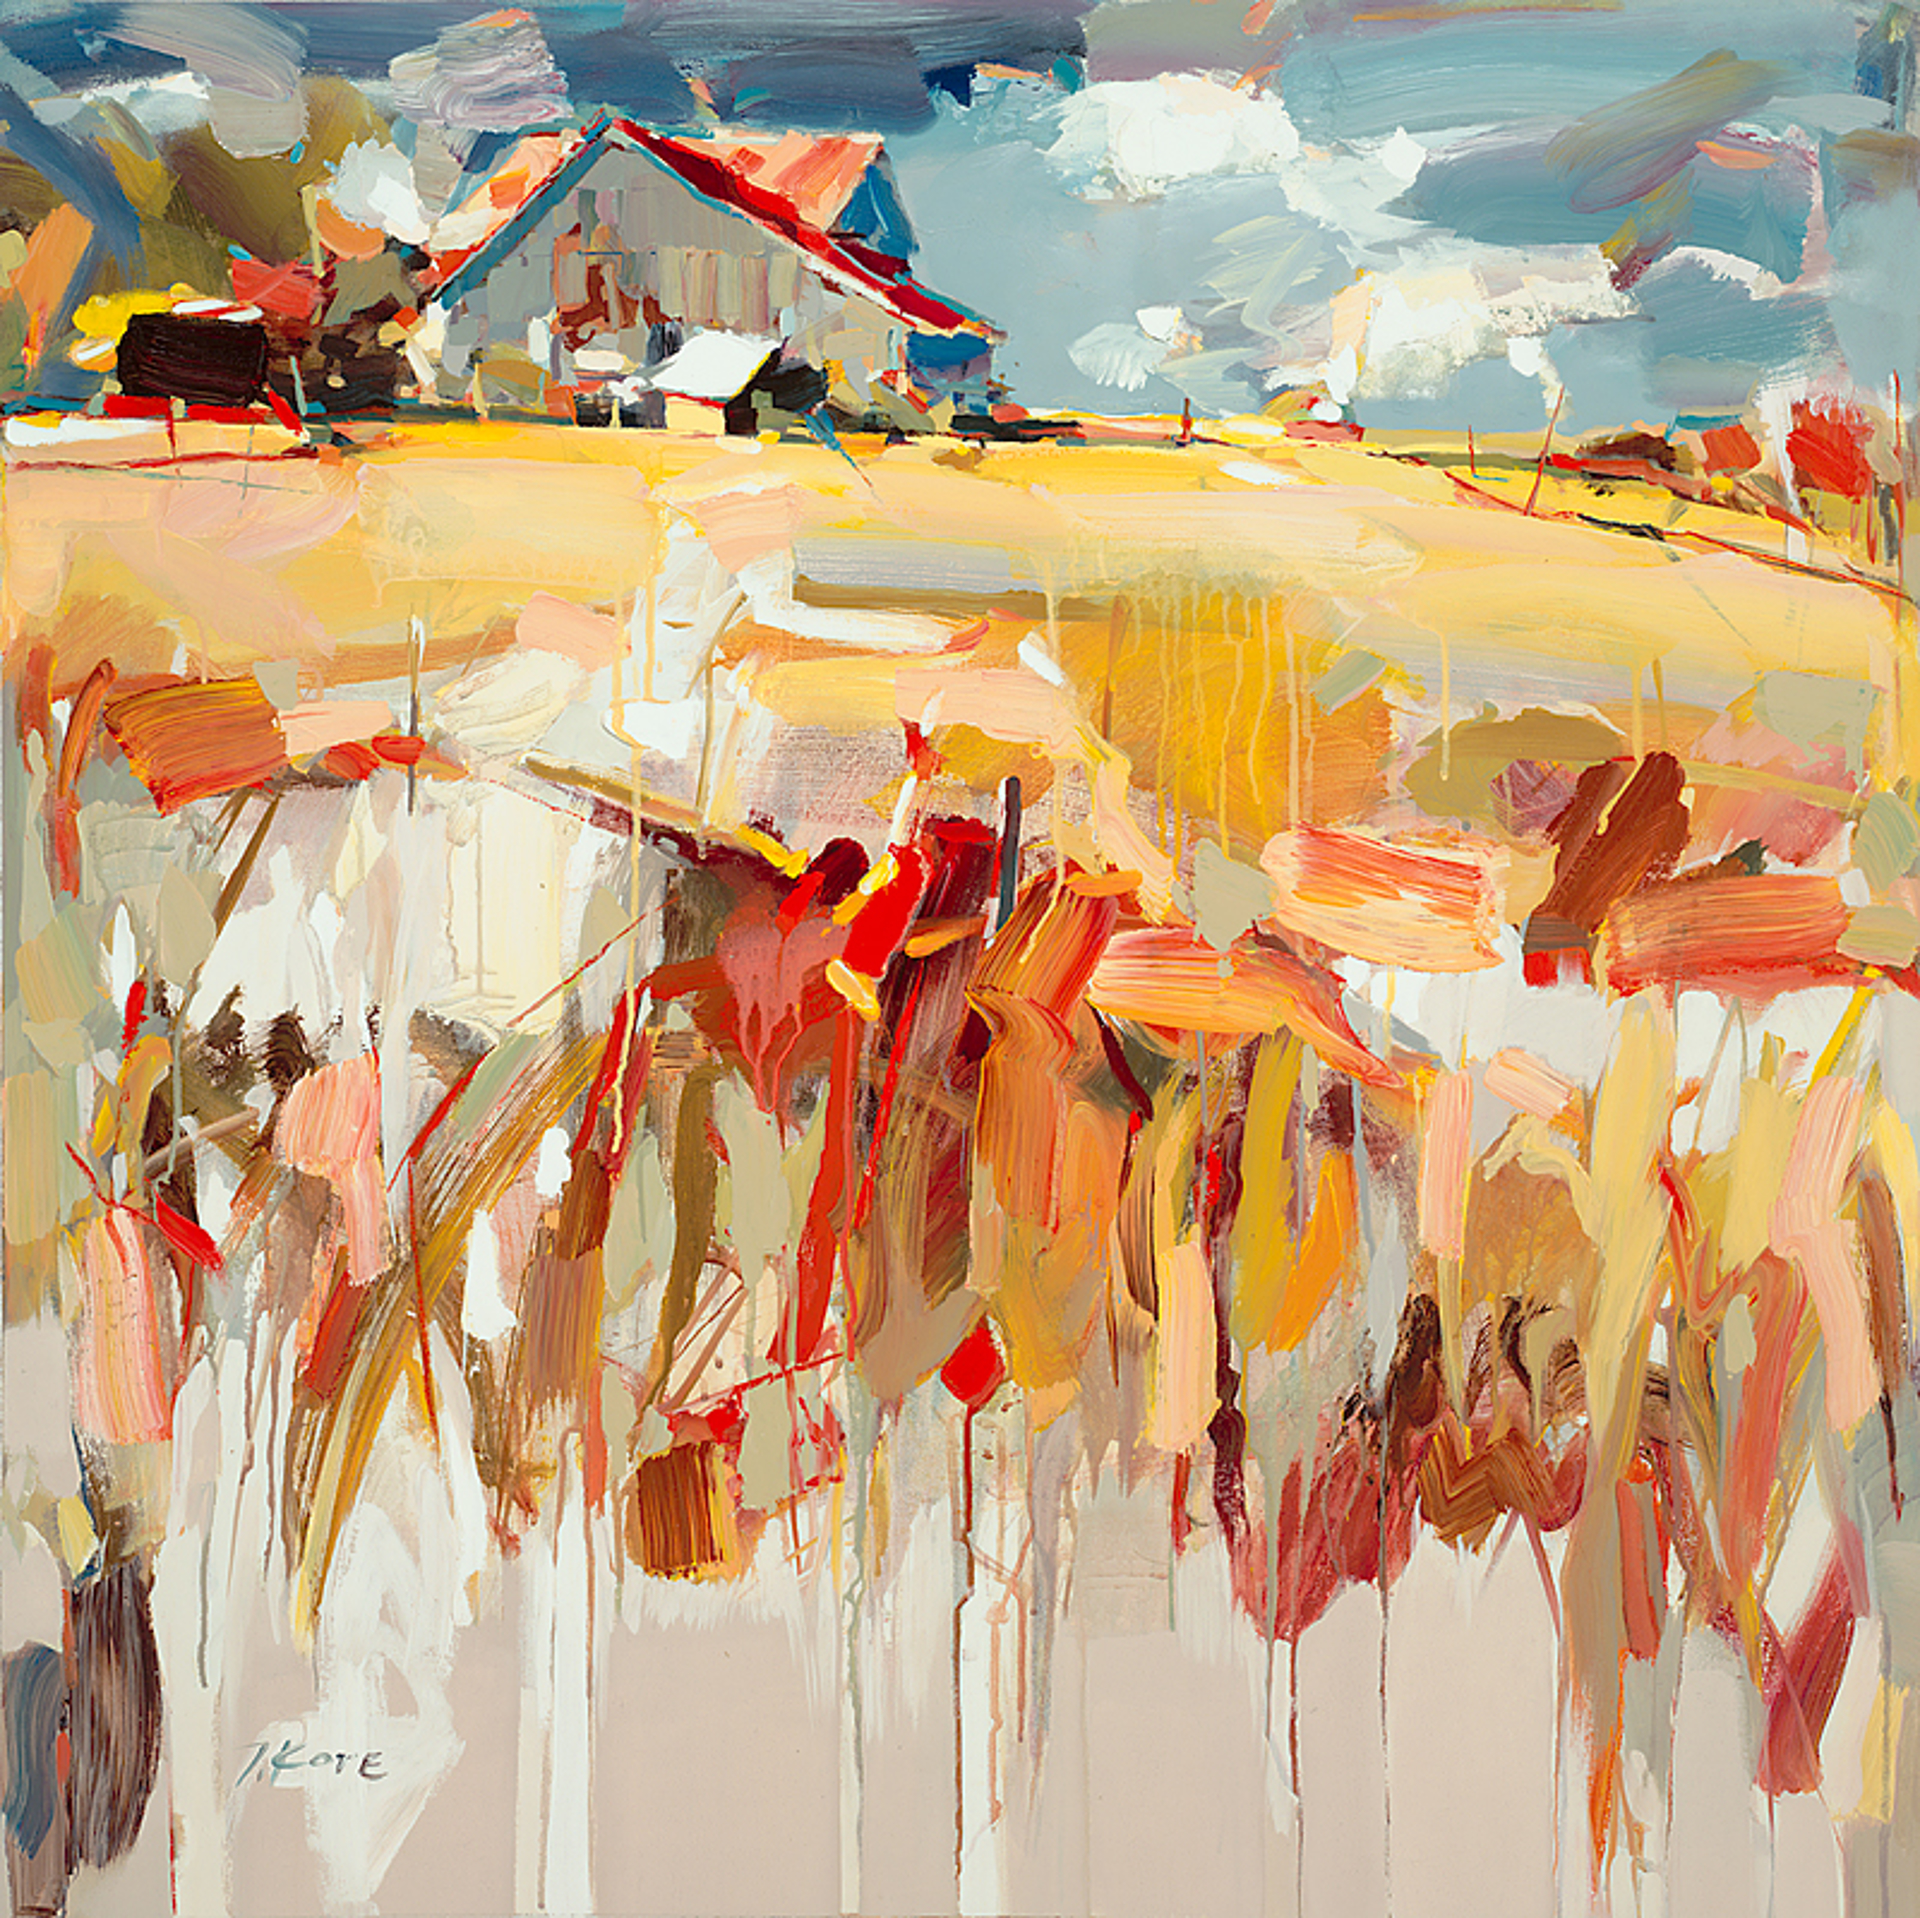 The Old Barn by Josef Kote